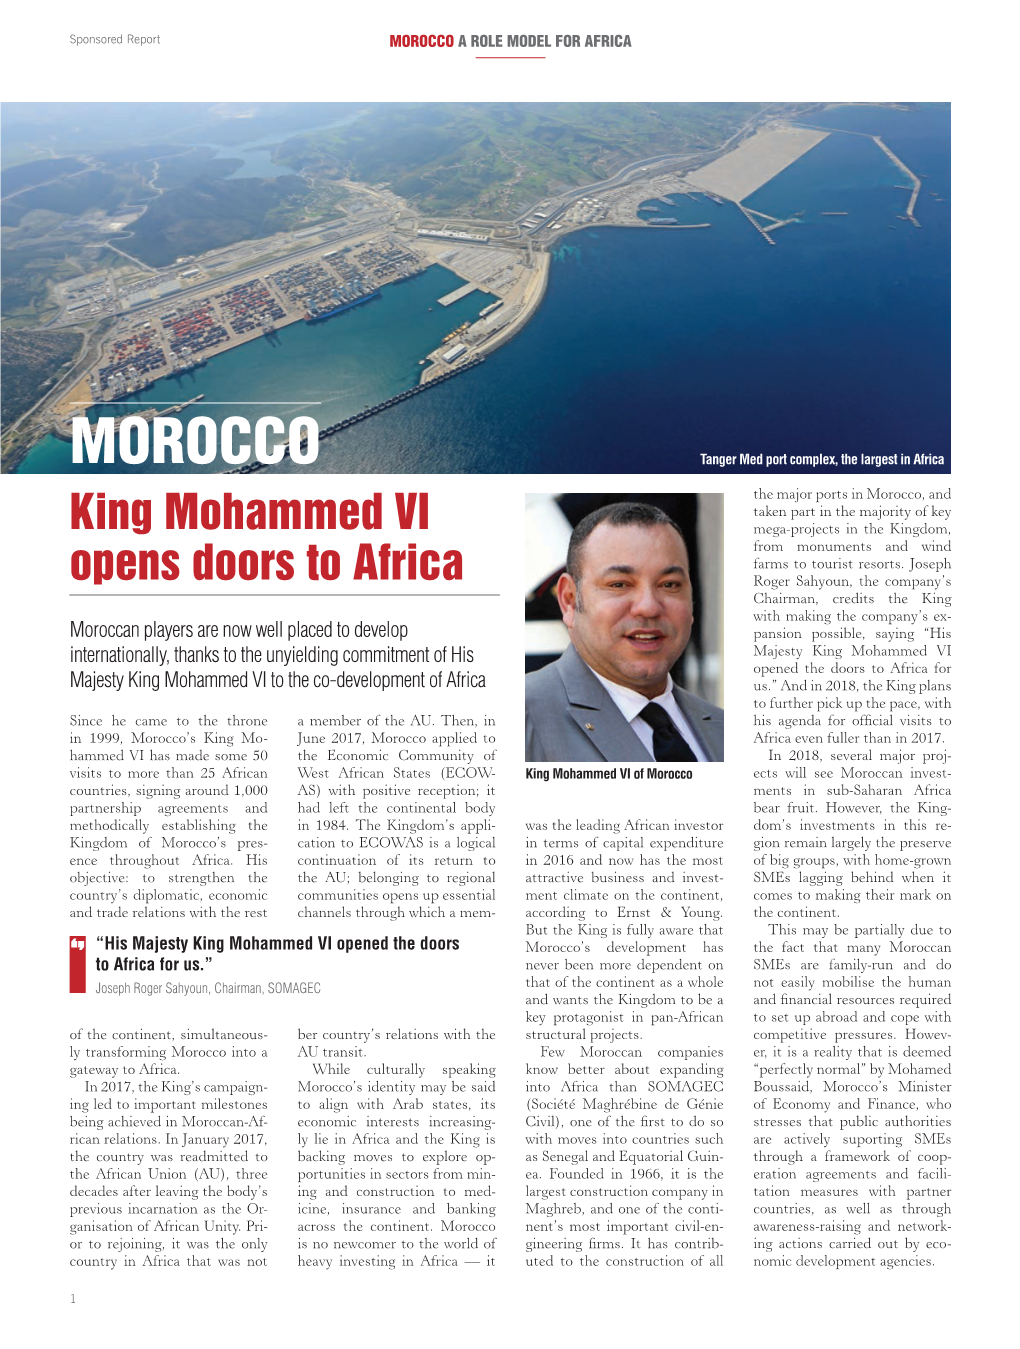 MOROCCO: King Mohammed VI Opens Doors to Africa